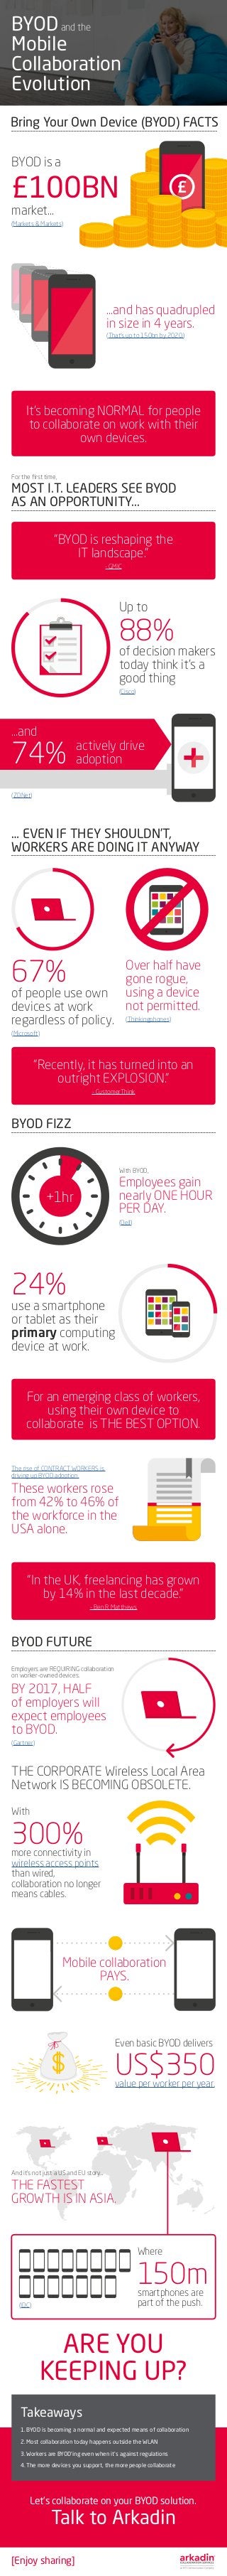 BYOD
Mobile
Collaboration
Evolution
Bring Your Own Device (BYOD) FACTS
… EVEN IF THEY SHOULDN’T,
WORKERS ARE DOING IT ANYWAY
BYOD FIZZ
BYOD FUTURE
For the first time,
MOST I.T. LEADERS SEE BYOD
AS AN OPPORTUNITY...
BYOD is a
£100BN
market...
...and has quadrupled
in size in 4 years.
“BYOD is reshaping the
IT landscape.”
- GMIC
Up to
88%
of decision makers
today think it’s a
good thing
(Cisco)
67%
of people use own
devices at work
regardless of policy.
(Microsoft)
Over half have
gone rogue,
using a device
not permitted.
(Thinkingphones)
With BYOD,
Employees gain
nearly ONE HOUR
PER DAY.
(Dell)
It’s becoming NORMAL for people
to collaborate on work with their
own devices.
(That’s up to 150bn by 2020.)
and the
...and
74%
(ZDNet)
actively drive
adoption
“Recently, it has turned into an
outright EXPLOSION.”
- CustomerThink
“In the UK, freelancing has grown
by 14% in the last decade.”
- Ben R Matthews
24%
use a smartphone
or tablet as their
primary computing
device at work.
The rise of CONTRACT WORKERS is
driving up BYOD adoption.
These workers rose
from 42% to 46% of
the workforce in the
USA alone.
Employers are REQUIRING collaboration
on worker-owned devices.
BY 2017, HALF
of employers will
expect employees
to BYOD.
(Gartner)
THE CORPORATE Wireless Local Area
Network IS BECOMING OBSOLETE.
+1hr
For an emerging class of workers,
using their own device to
collaborate is THE BEST OPTION.
With
300%more connectivity in
wireless access points
than wired,
collaboration no longer
means cables.
Even basic BYOD delivers
US$350value per worker per year.
THE FASTEST
GROWTH IS IN ASIA.
And it’s not just a US and EU story…
Mobile collaboration
PAYS.
Where
150msmartphones are
part of the push.
[Enjoy sharing]
Let’s collaborate on your BYOD solution.
Talk to Arkadin
1.	BYOD is becoming a normal and expected means of collaboration
2.	Most collaboration today happens outside the WLAN
3.	Workers are BYOD’ing even when it’s against regulations
4.	The more devices you support, the more people collaborate
Takeaways
ARE YOU
KEEPING UP?
(Markets & Markets)
(IDC)
 